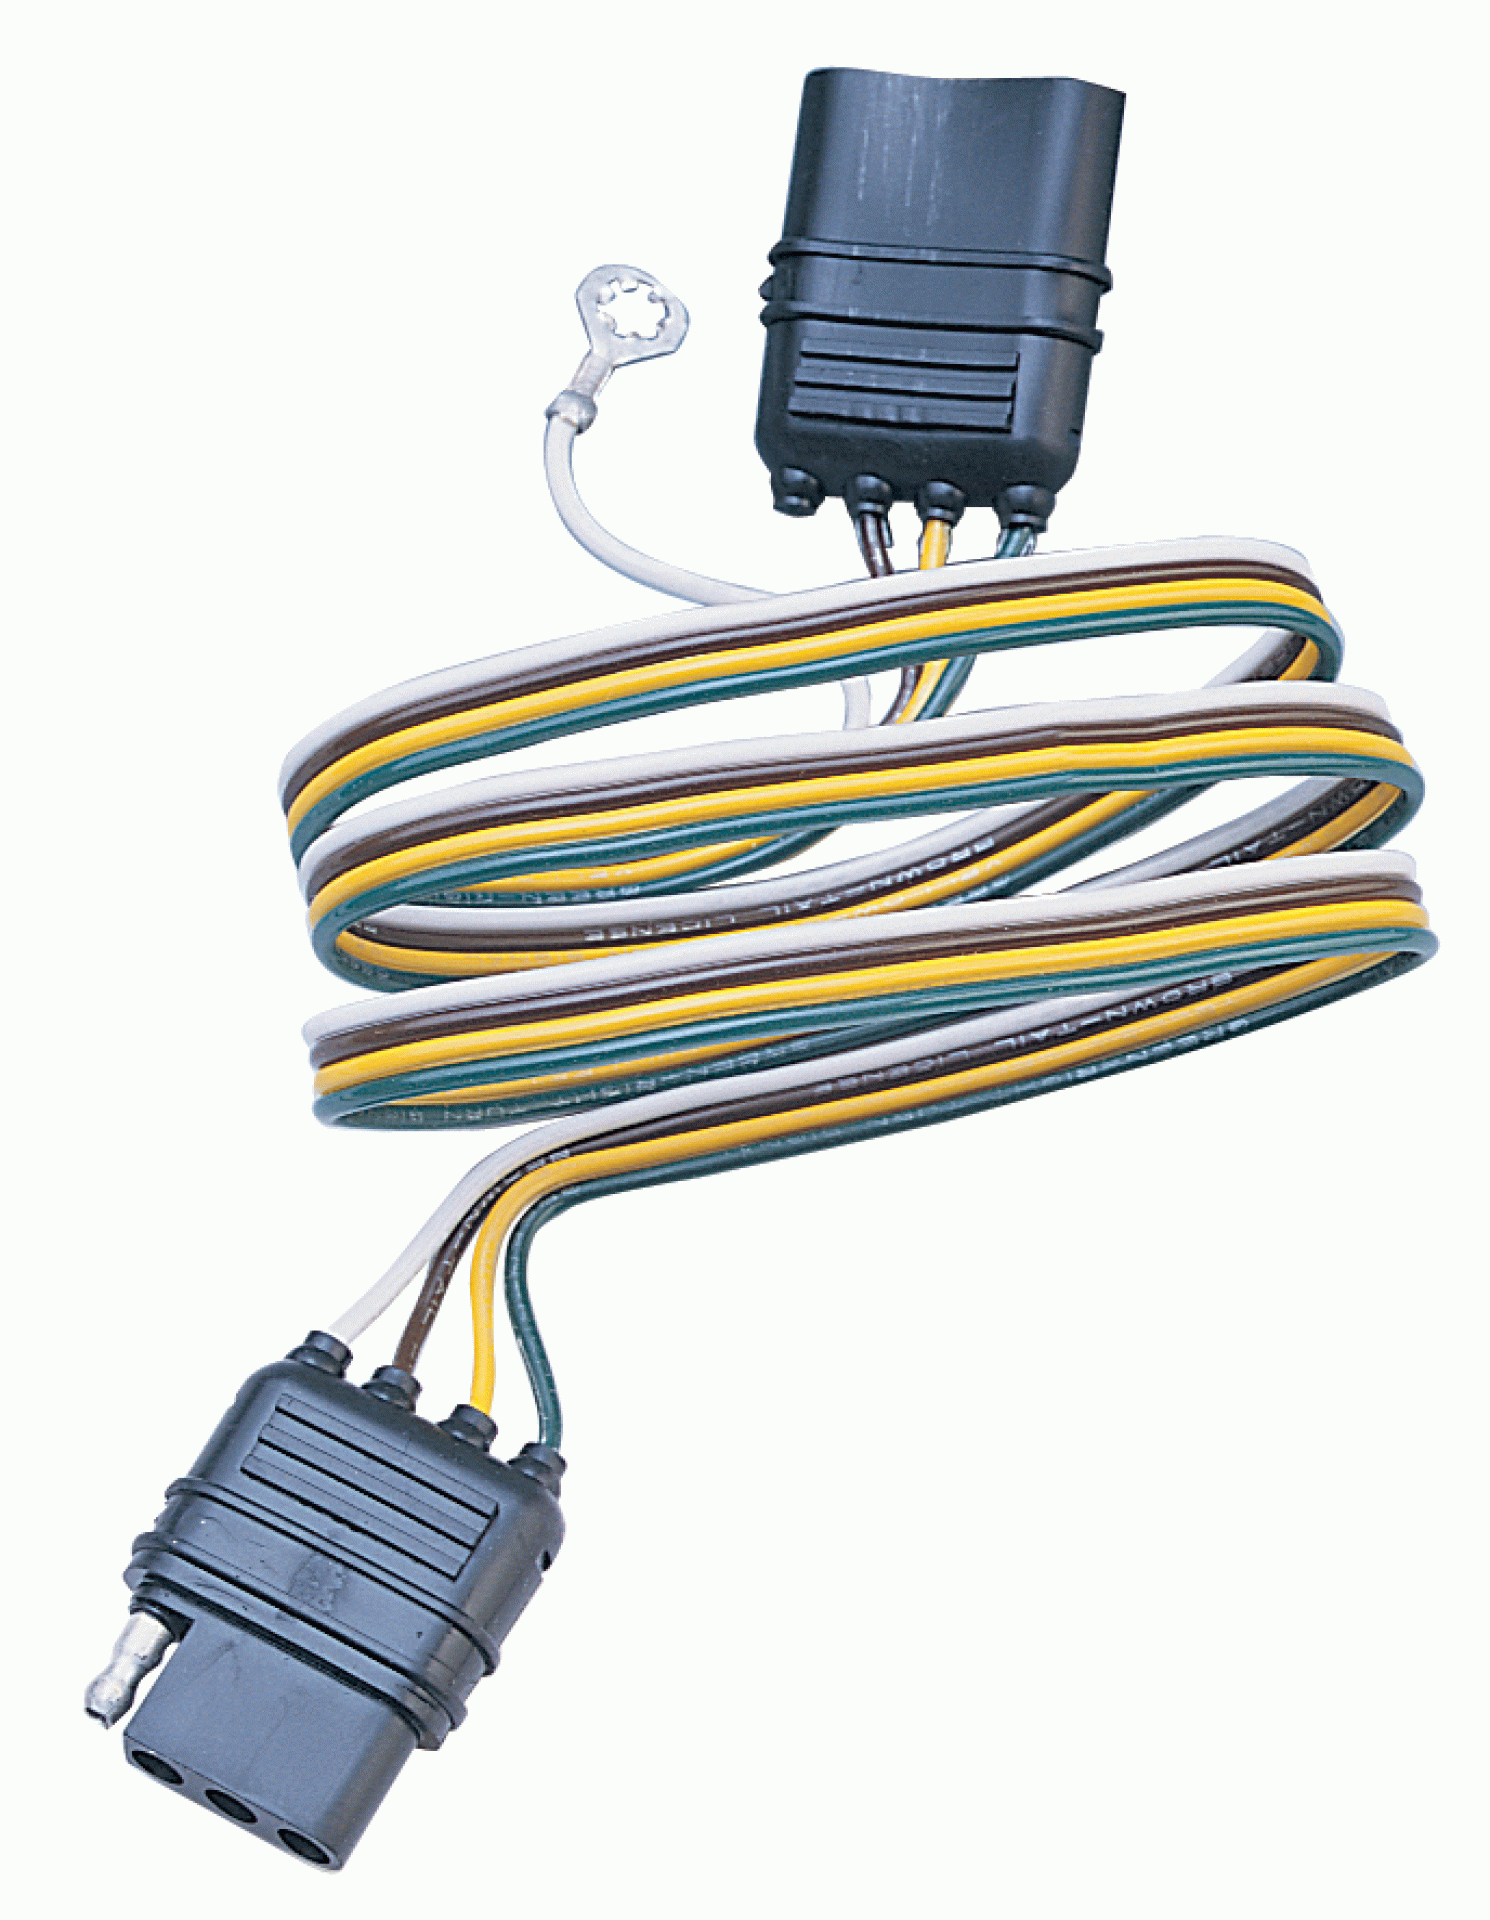 HOPKINS MFG CORP | 47105 | CONNECTOR HARNESS 4 WIRE FLAT HARNESS WITH RING TERMINAL